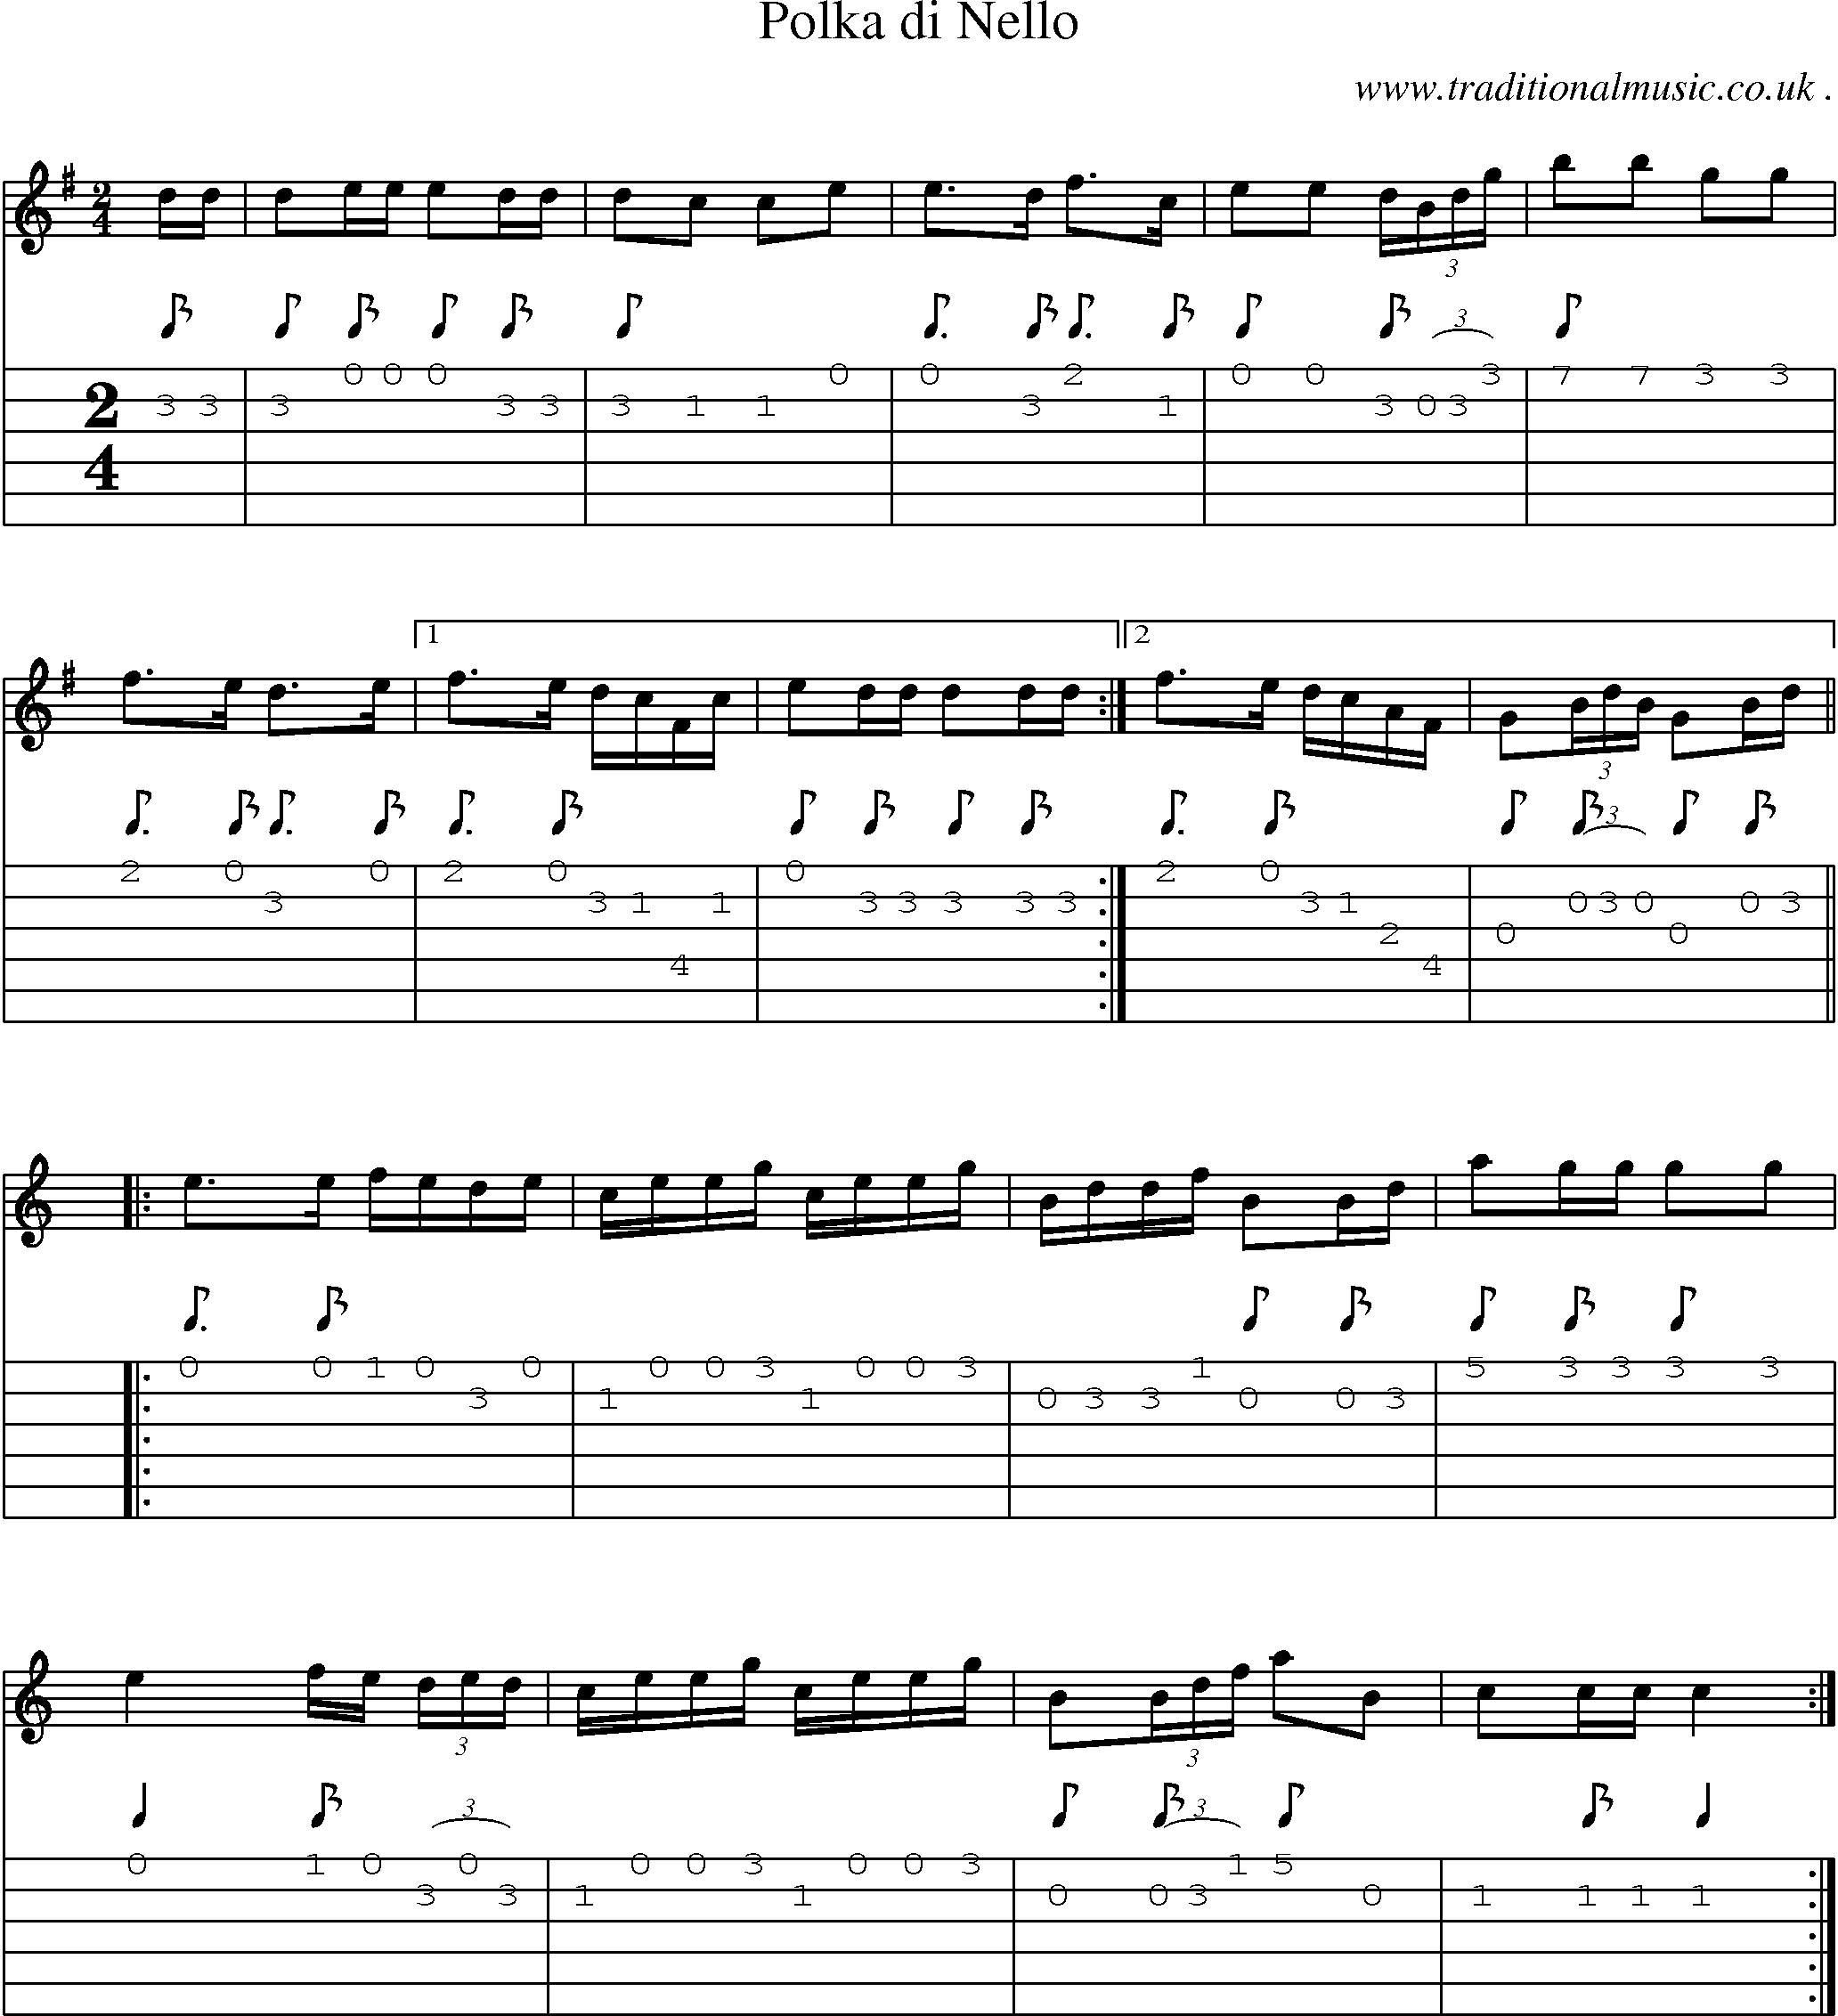 Sheet-Music and Guitar Tabs for Polka Di Nello